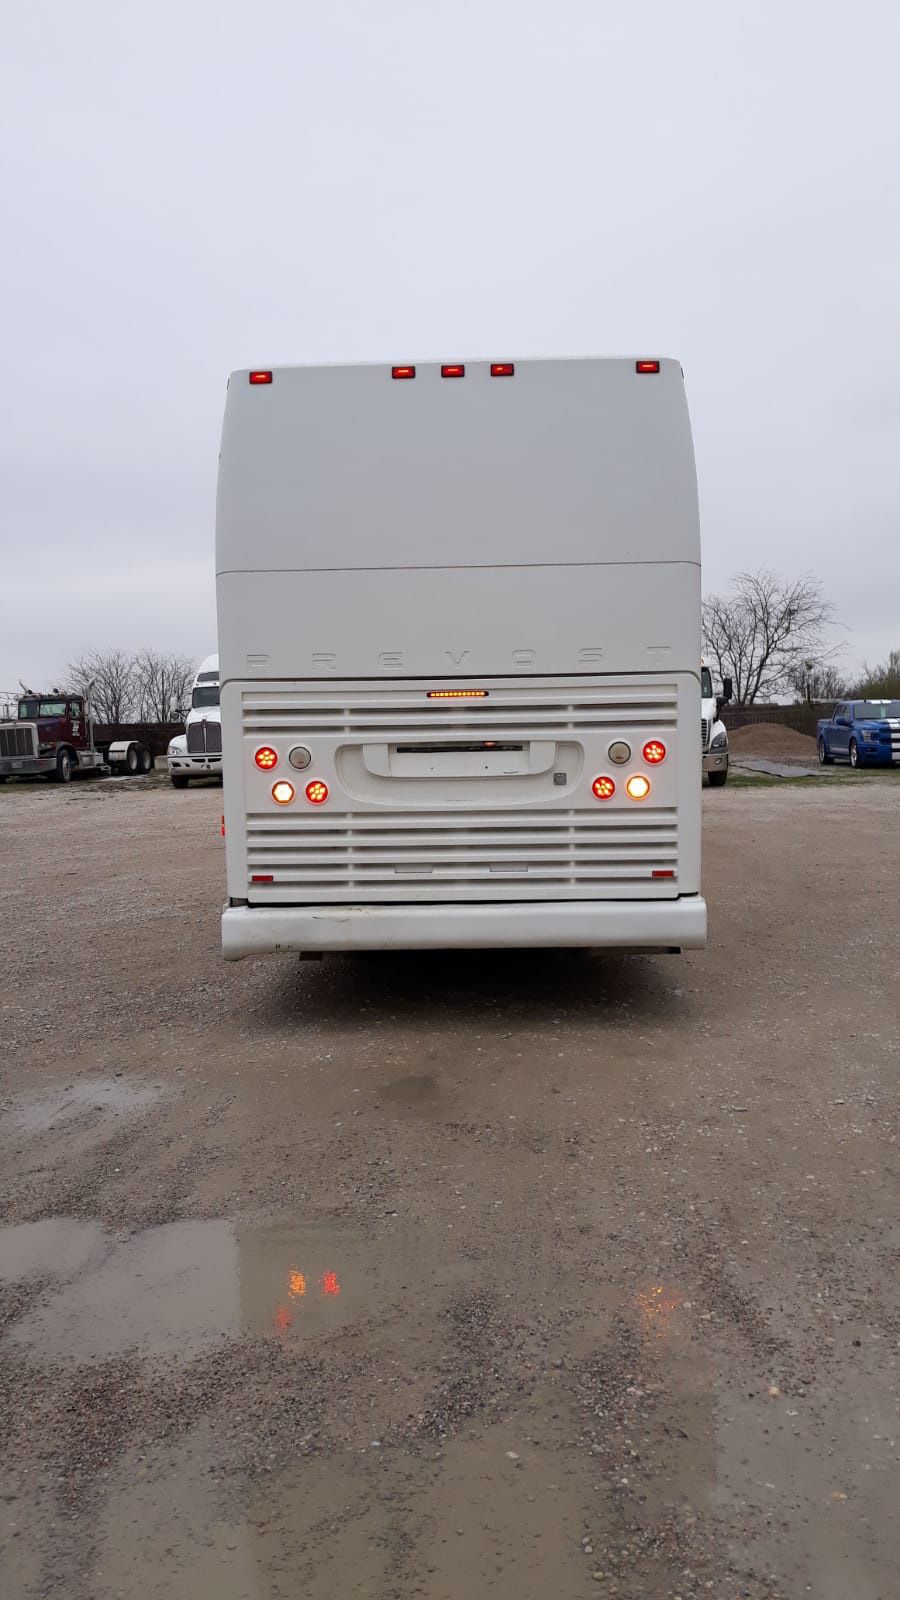 Prevost Bus H3-45 2006 Diagnostics and repair also PM services just like your prevost I take care or your coach